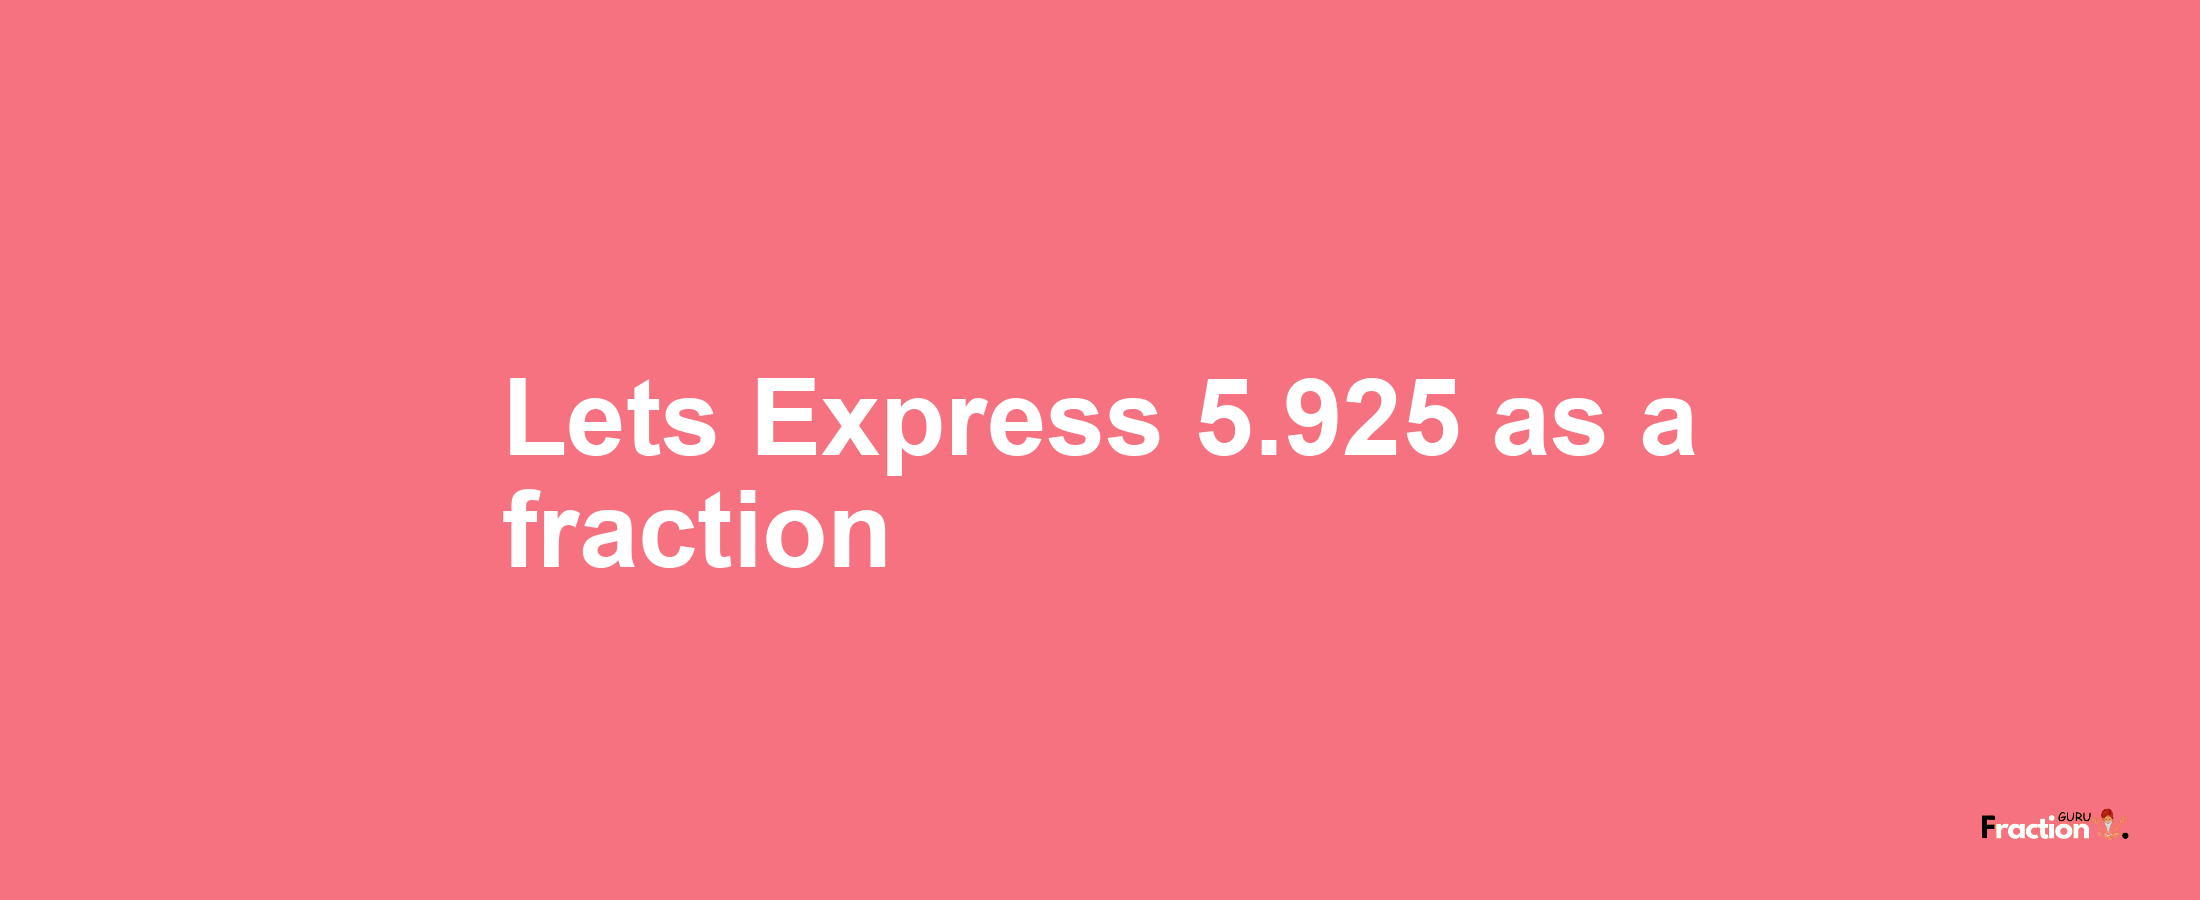 Lets Express 5.925 as afraction